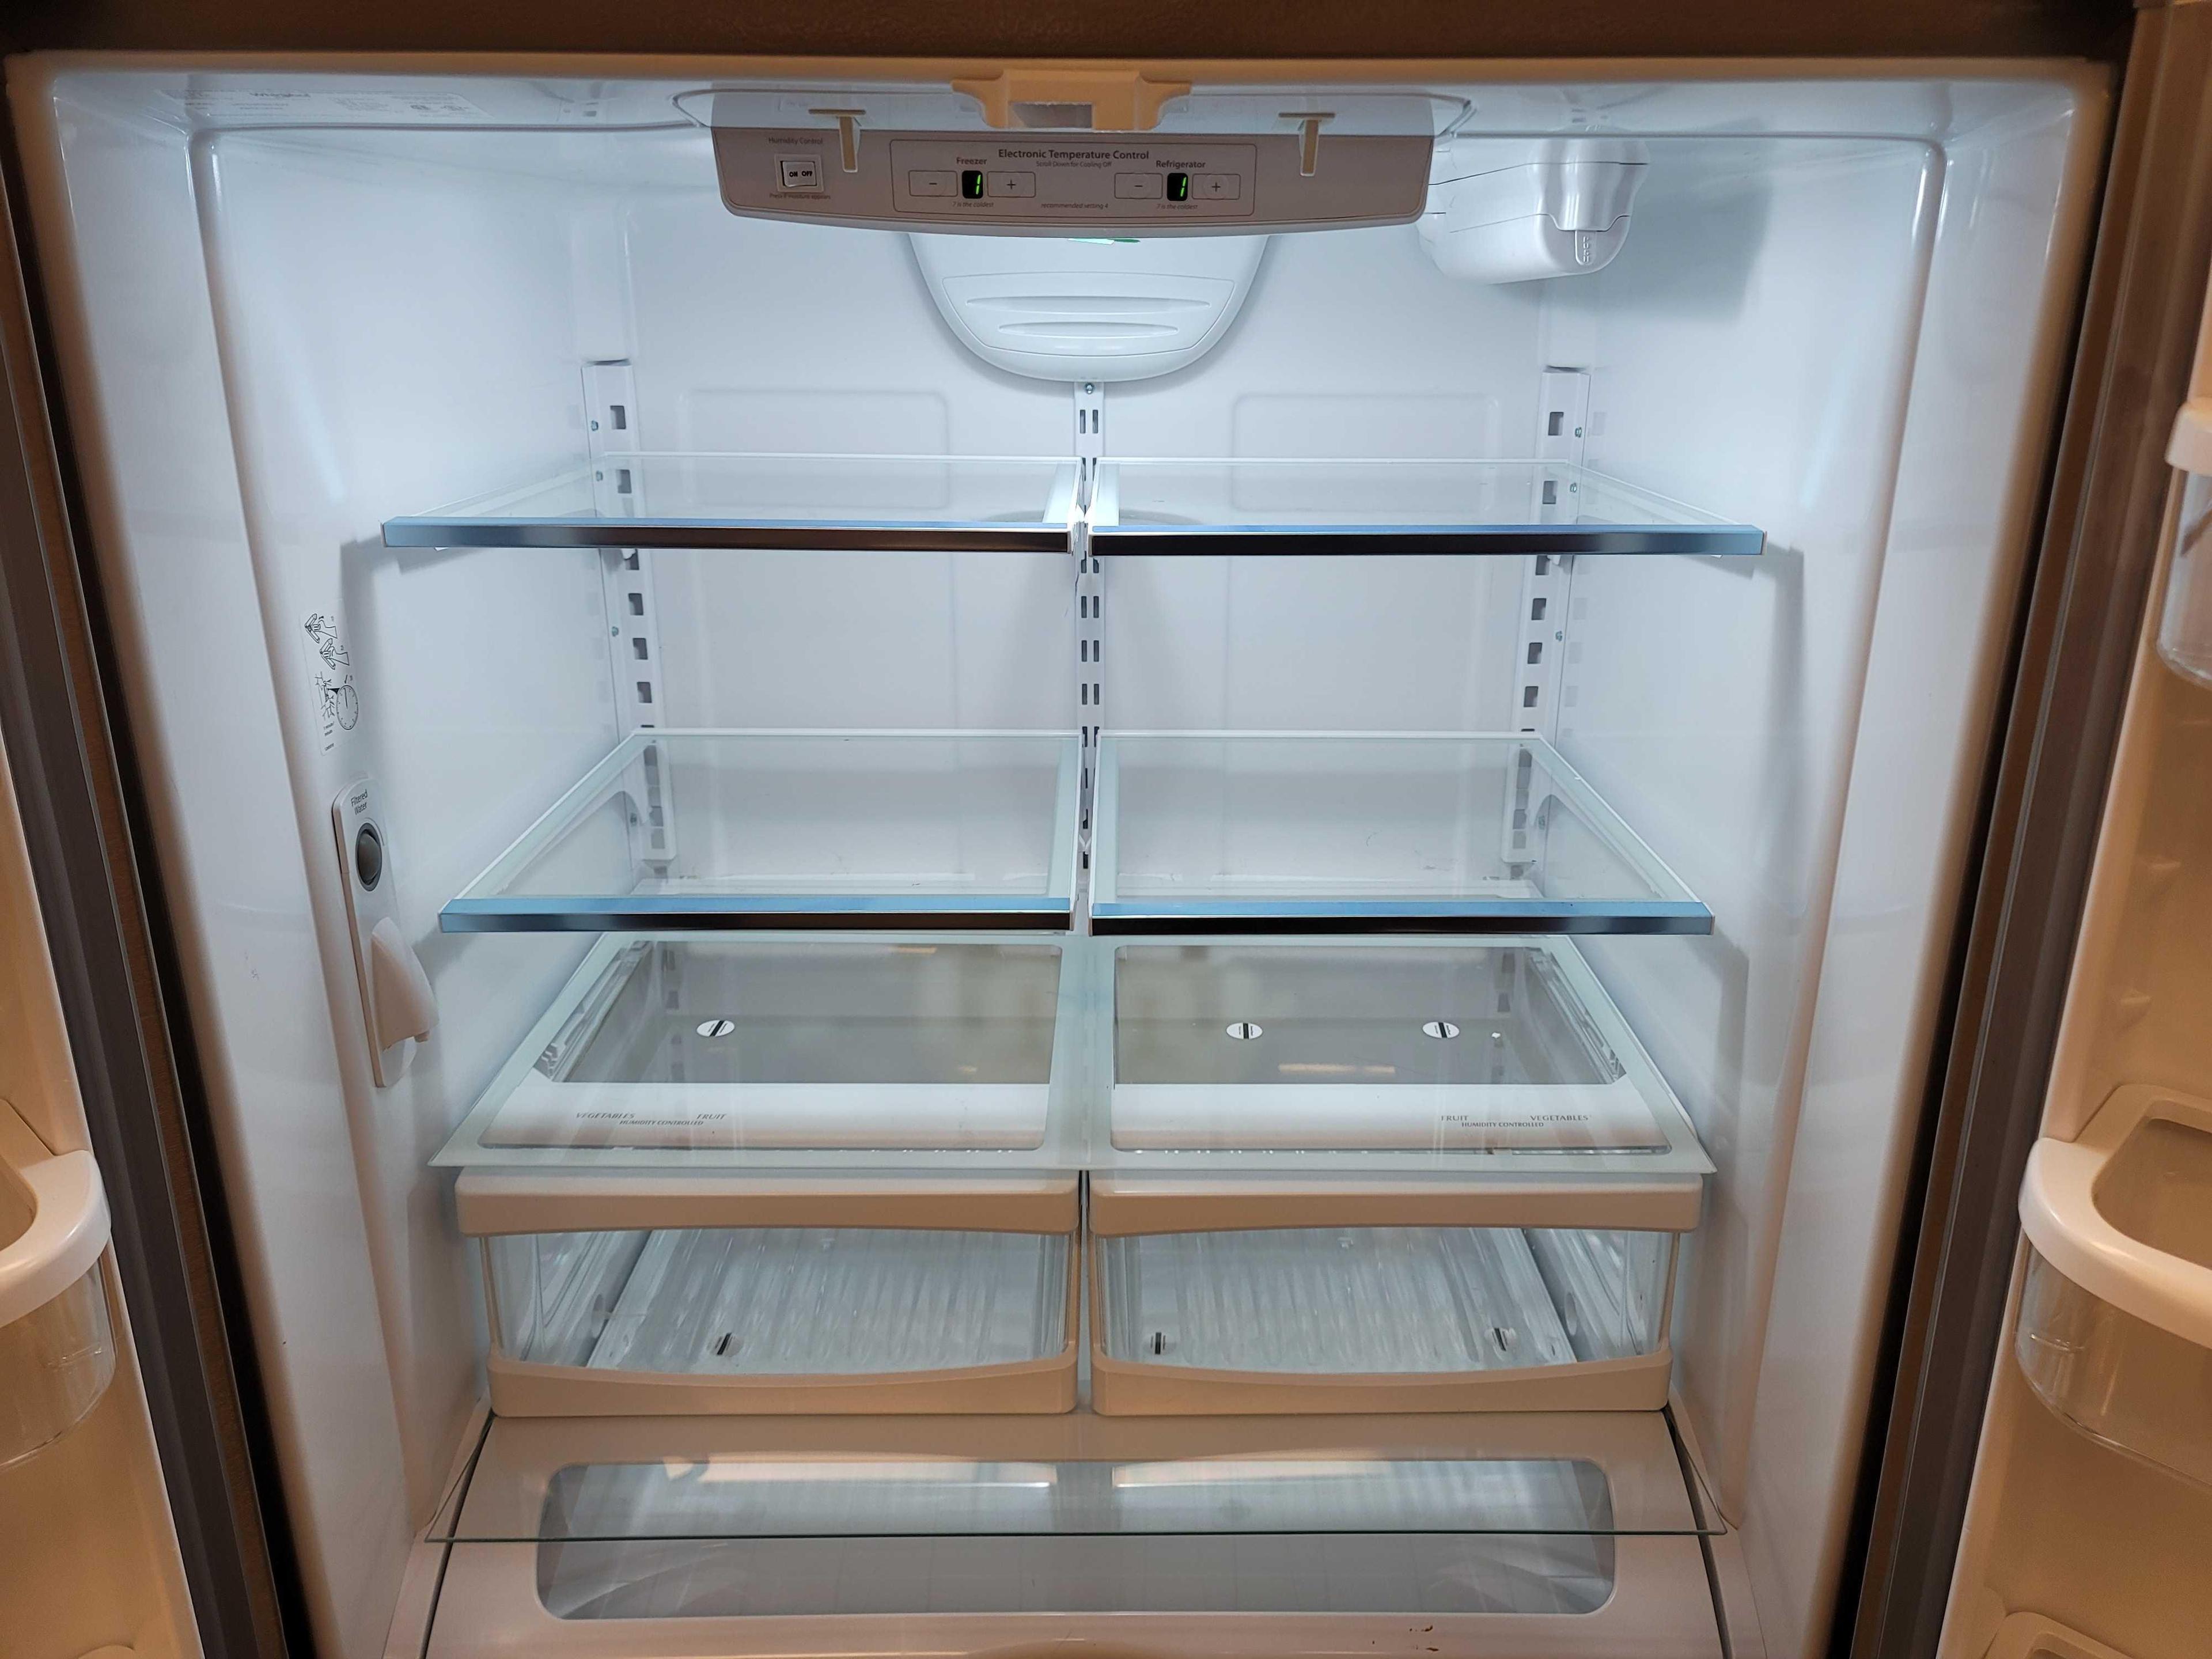 WHIRLPOOL 25.2 CU. FT. FRENCH DOOR REFRIGERATOR WITH ICE MAKER. FINGERPRINT RESISTANT STAINLESS